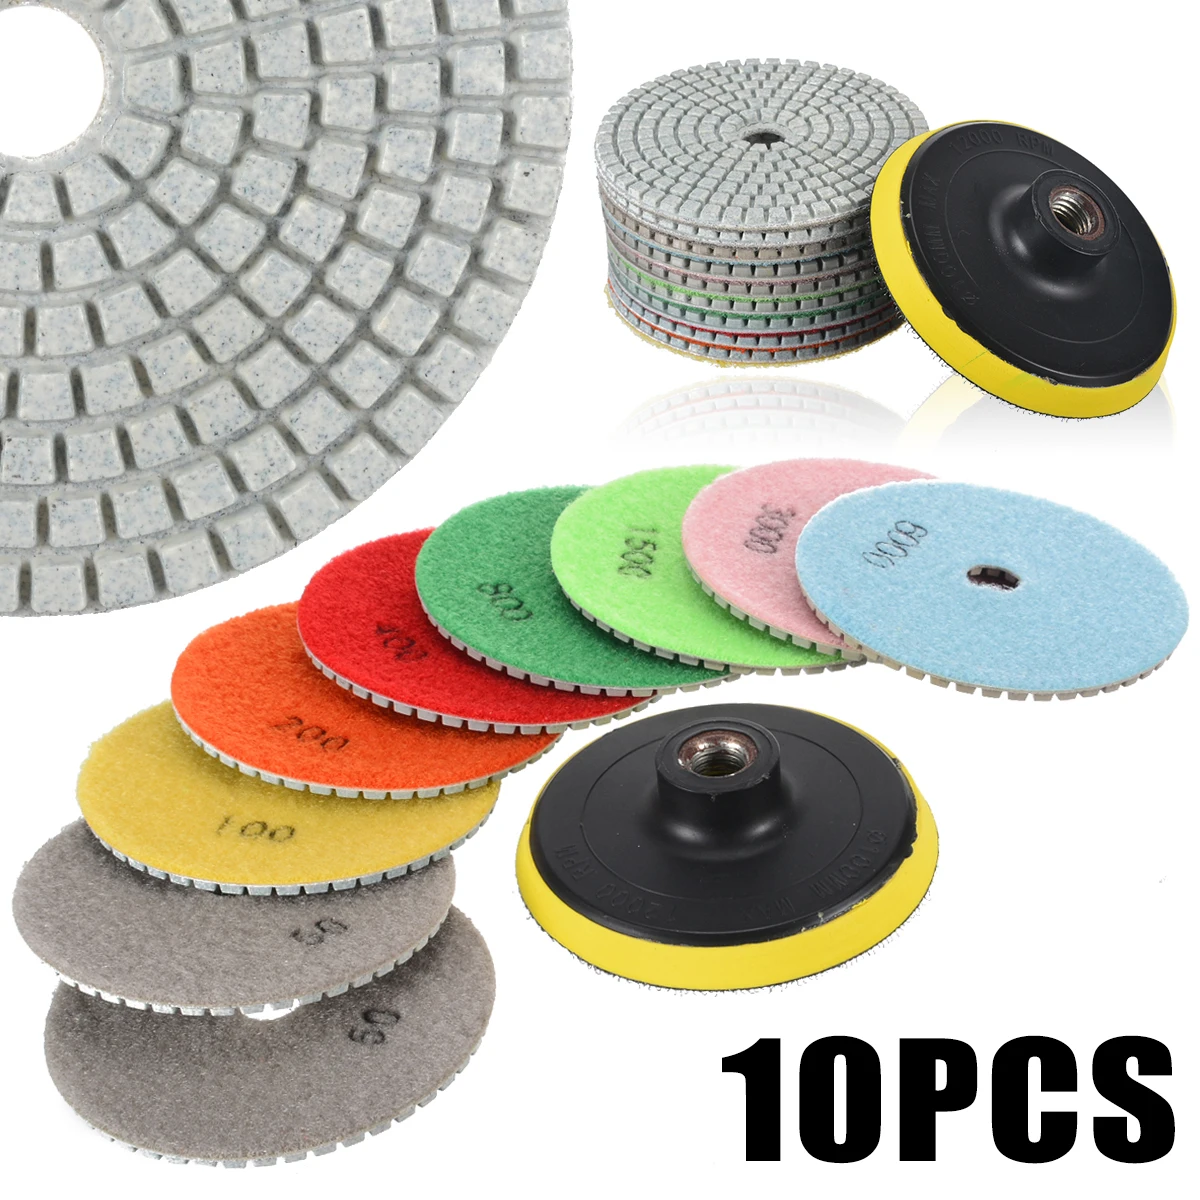 Details about   UK Diamond Polishing Pads Granite Marble Concrete Stone Grinding Discs Hand Tool 